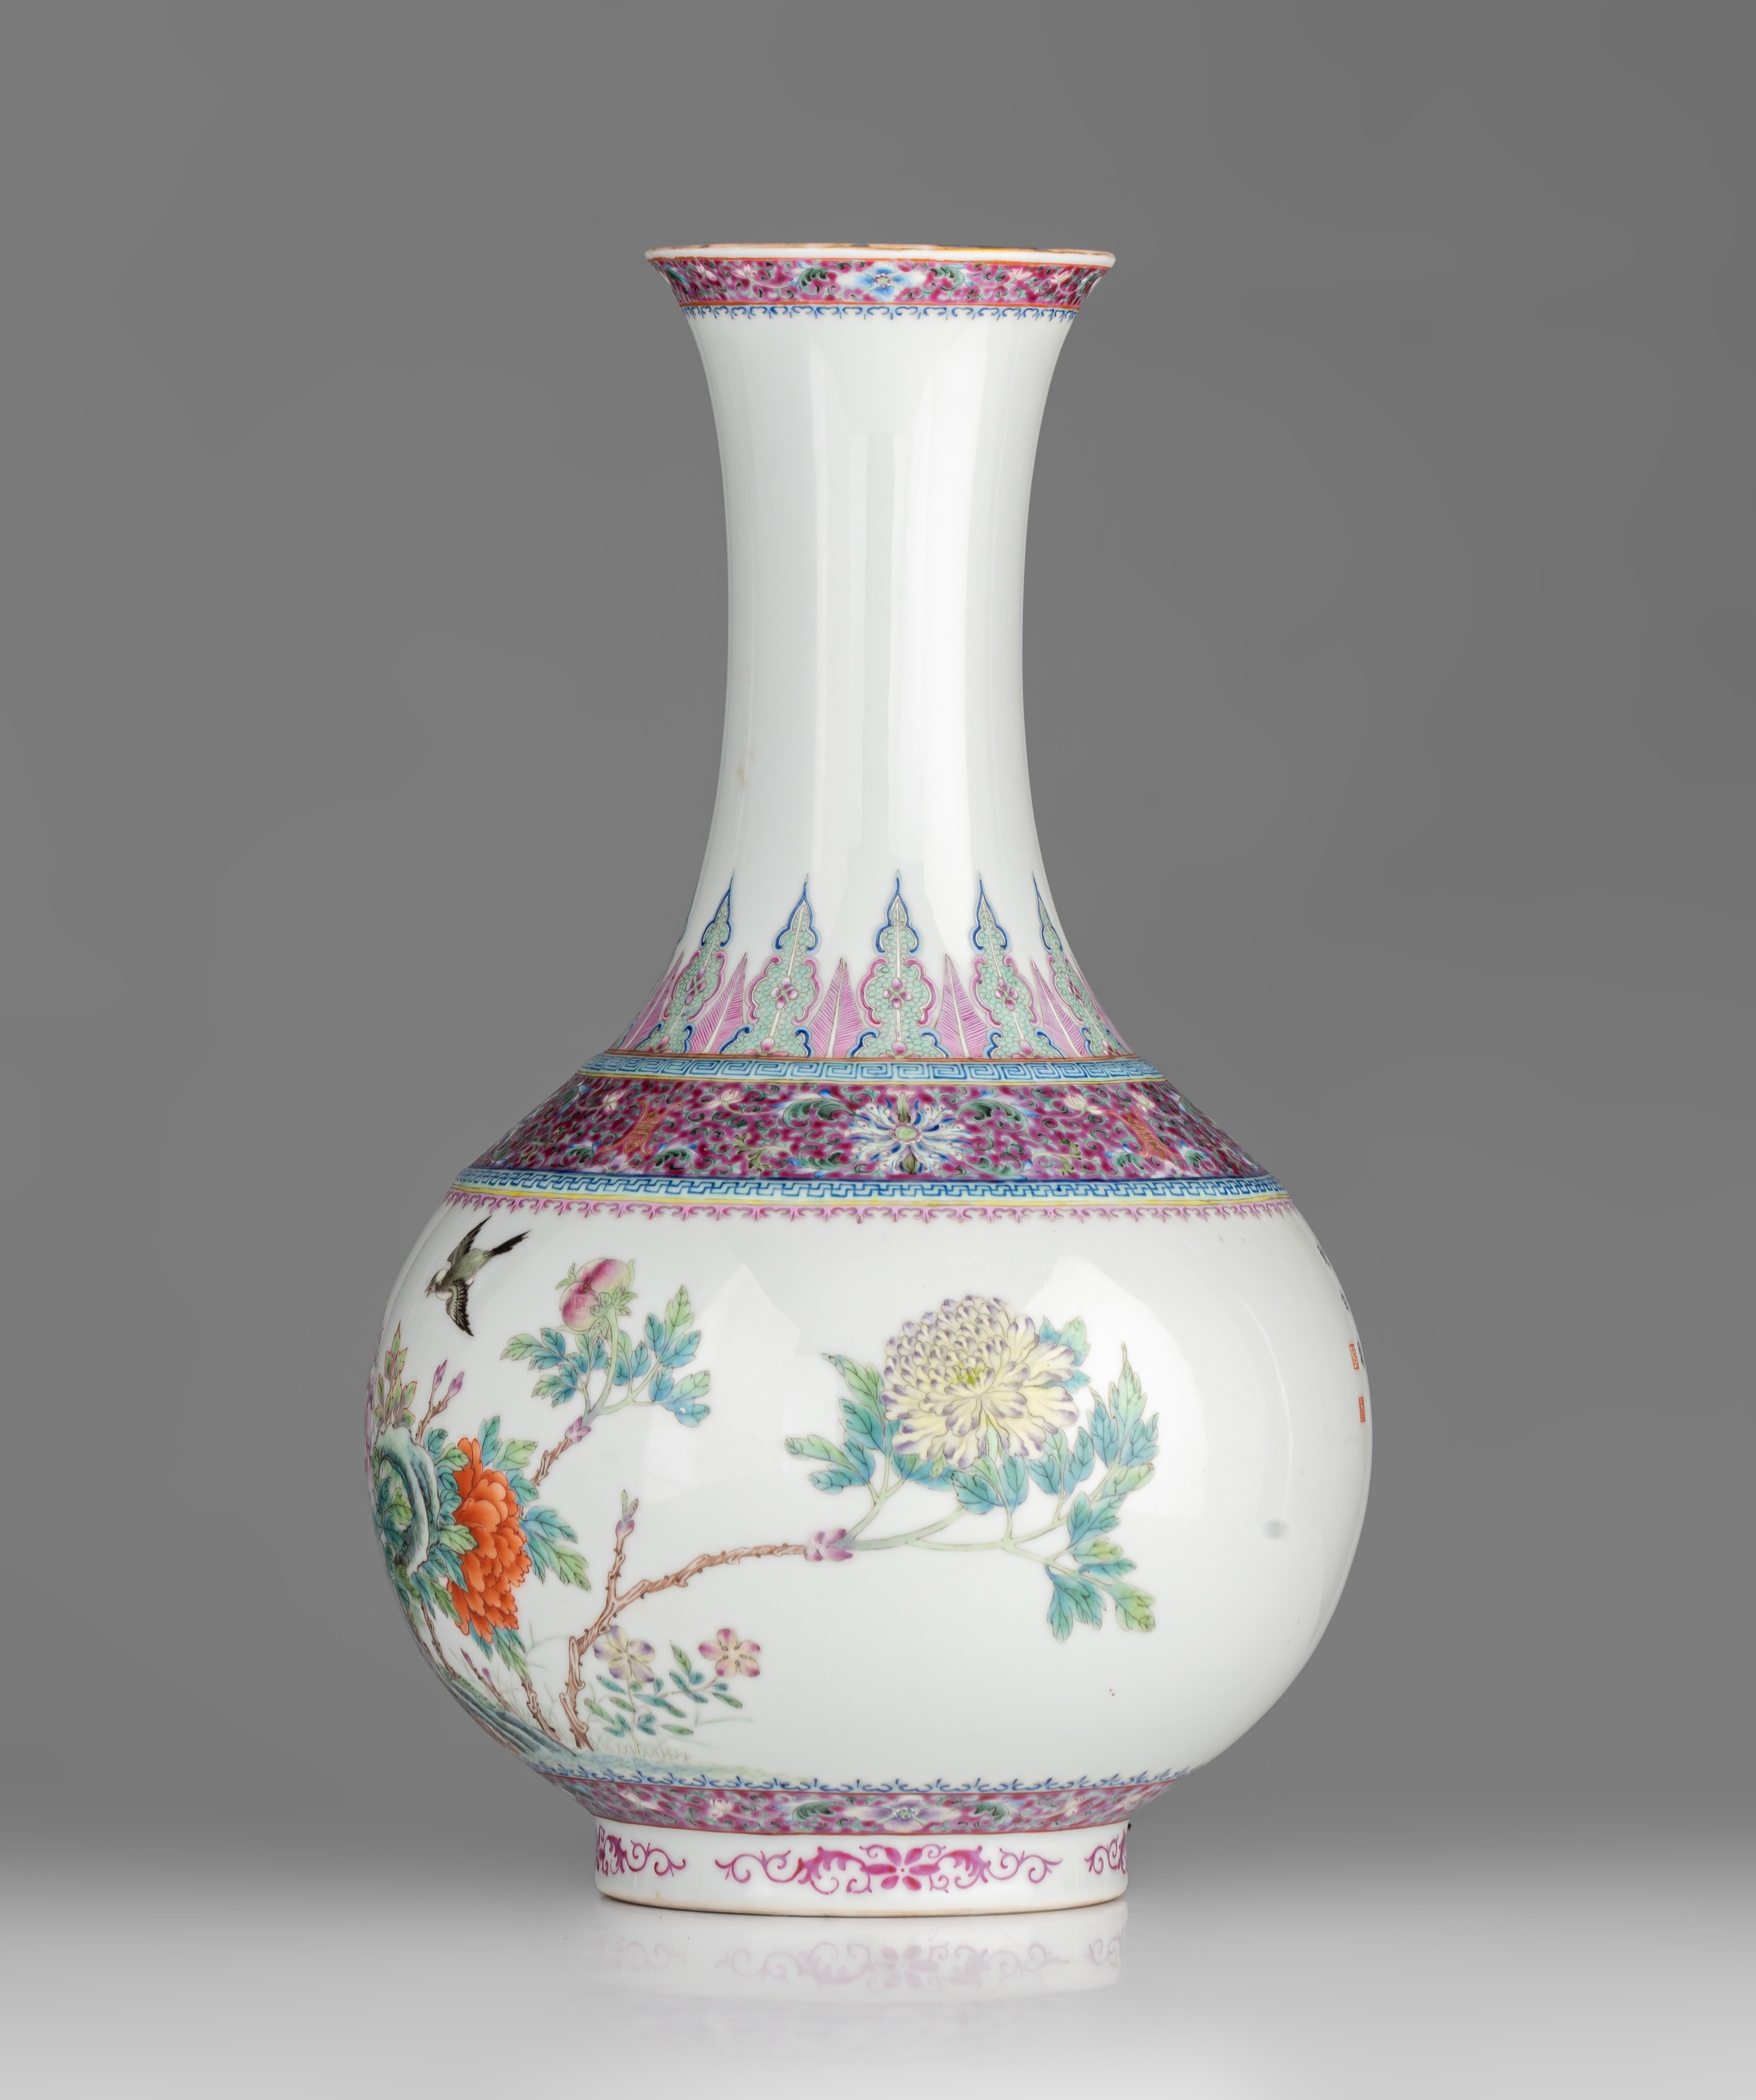 A fine Chinese famille rose 'Birds and Flowers' bottle vase, with a Qianlong mark, Republic period, - Image 4 of 9